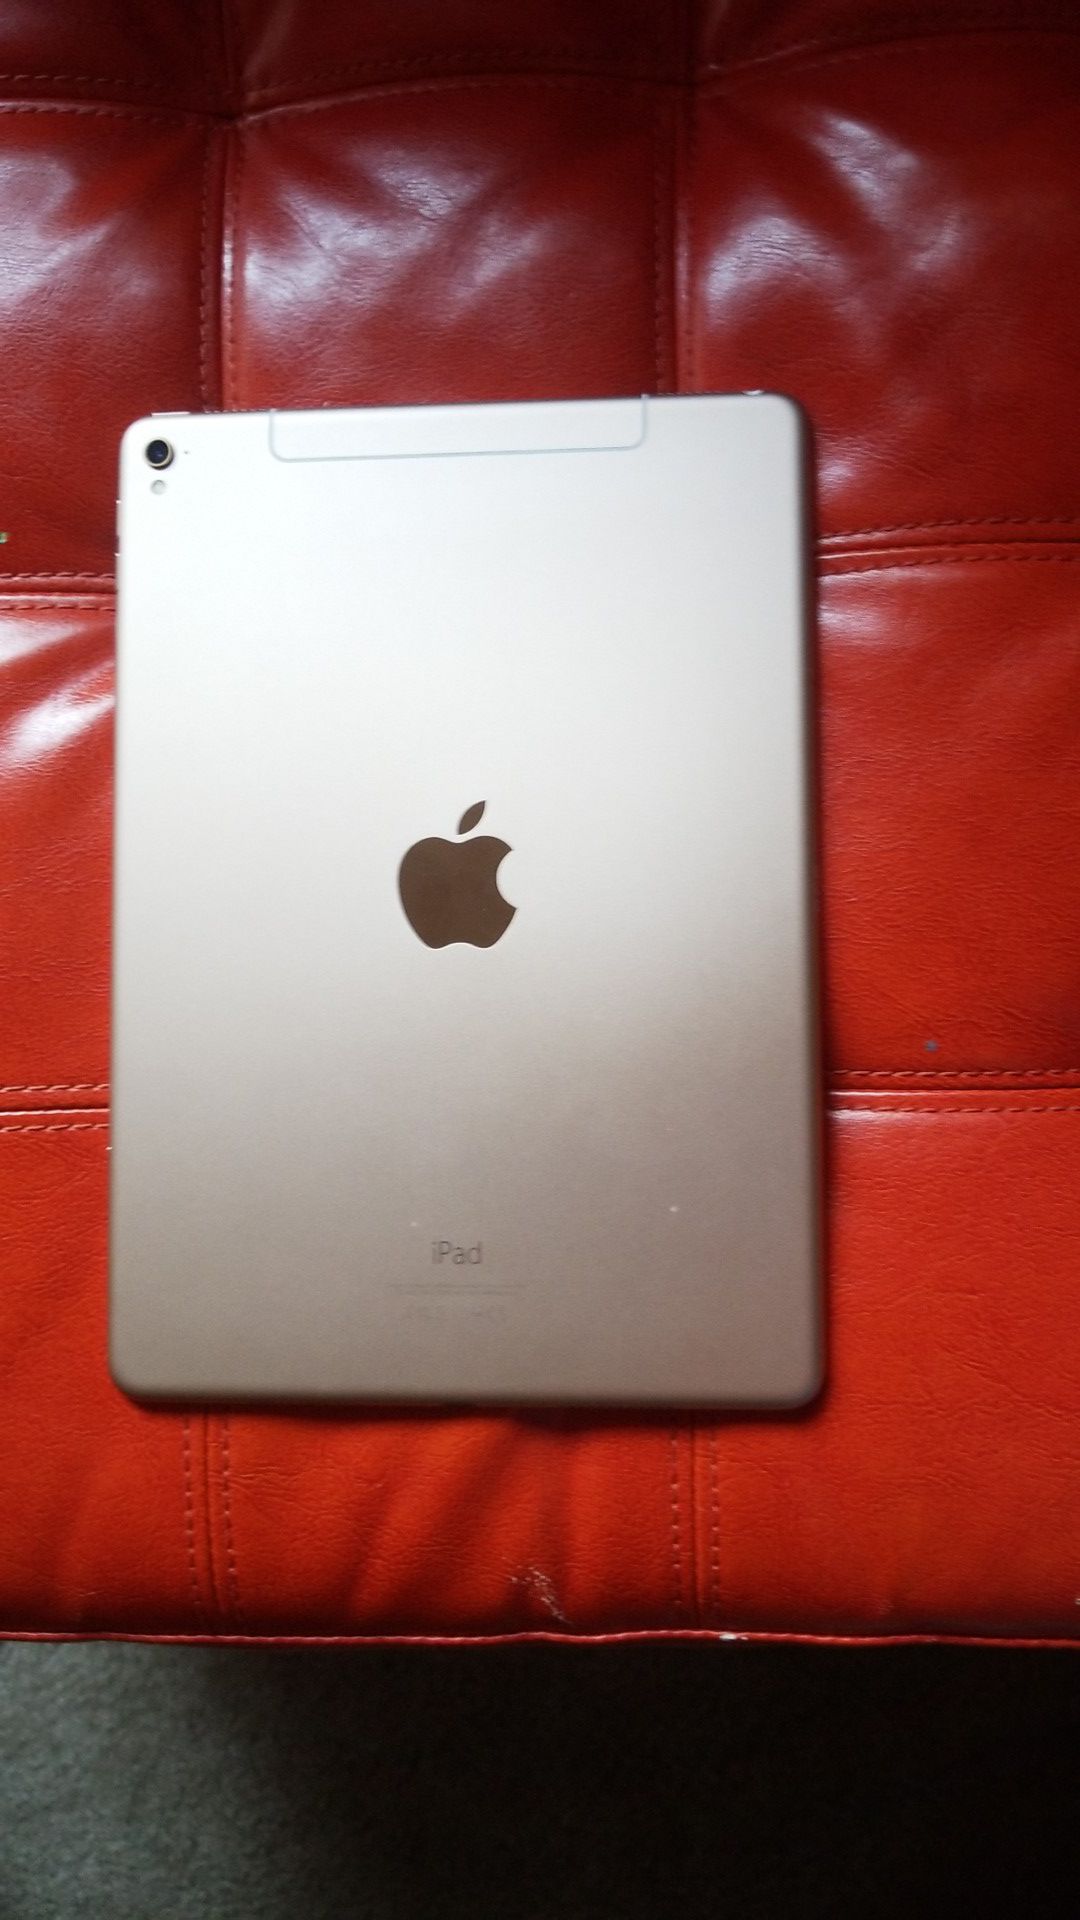 iPad pro 2016 front color white and back gold color 32 gb